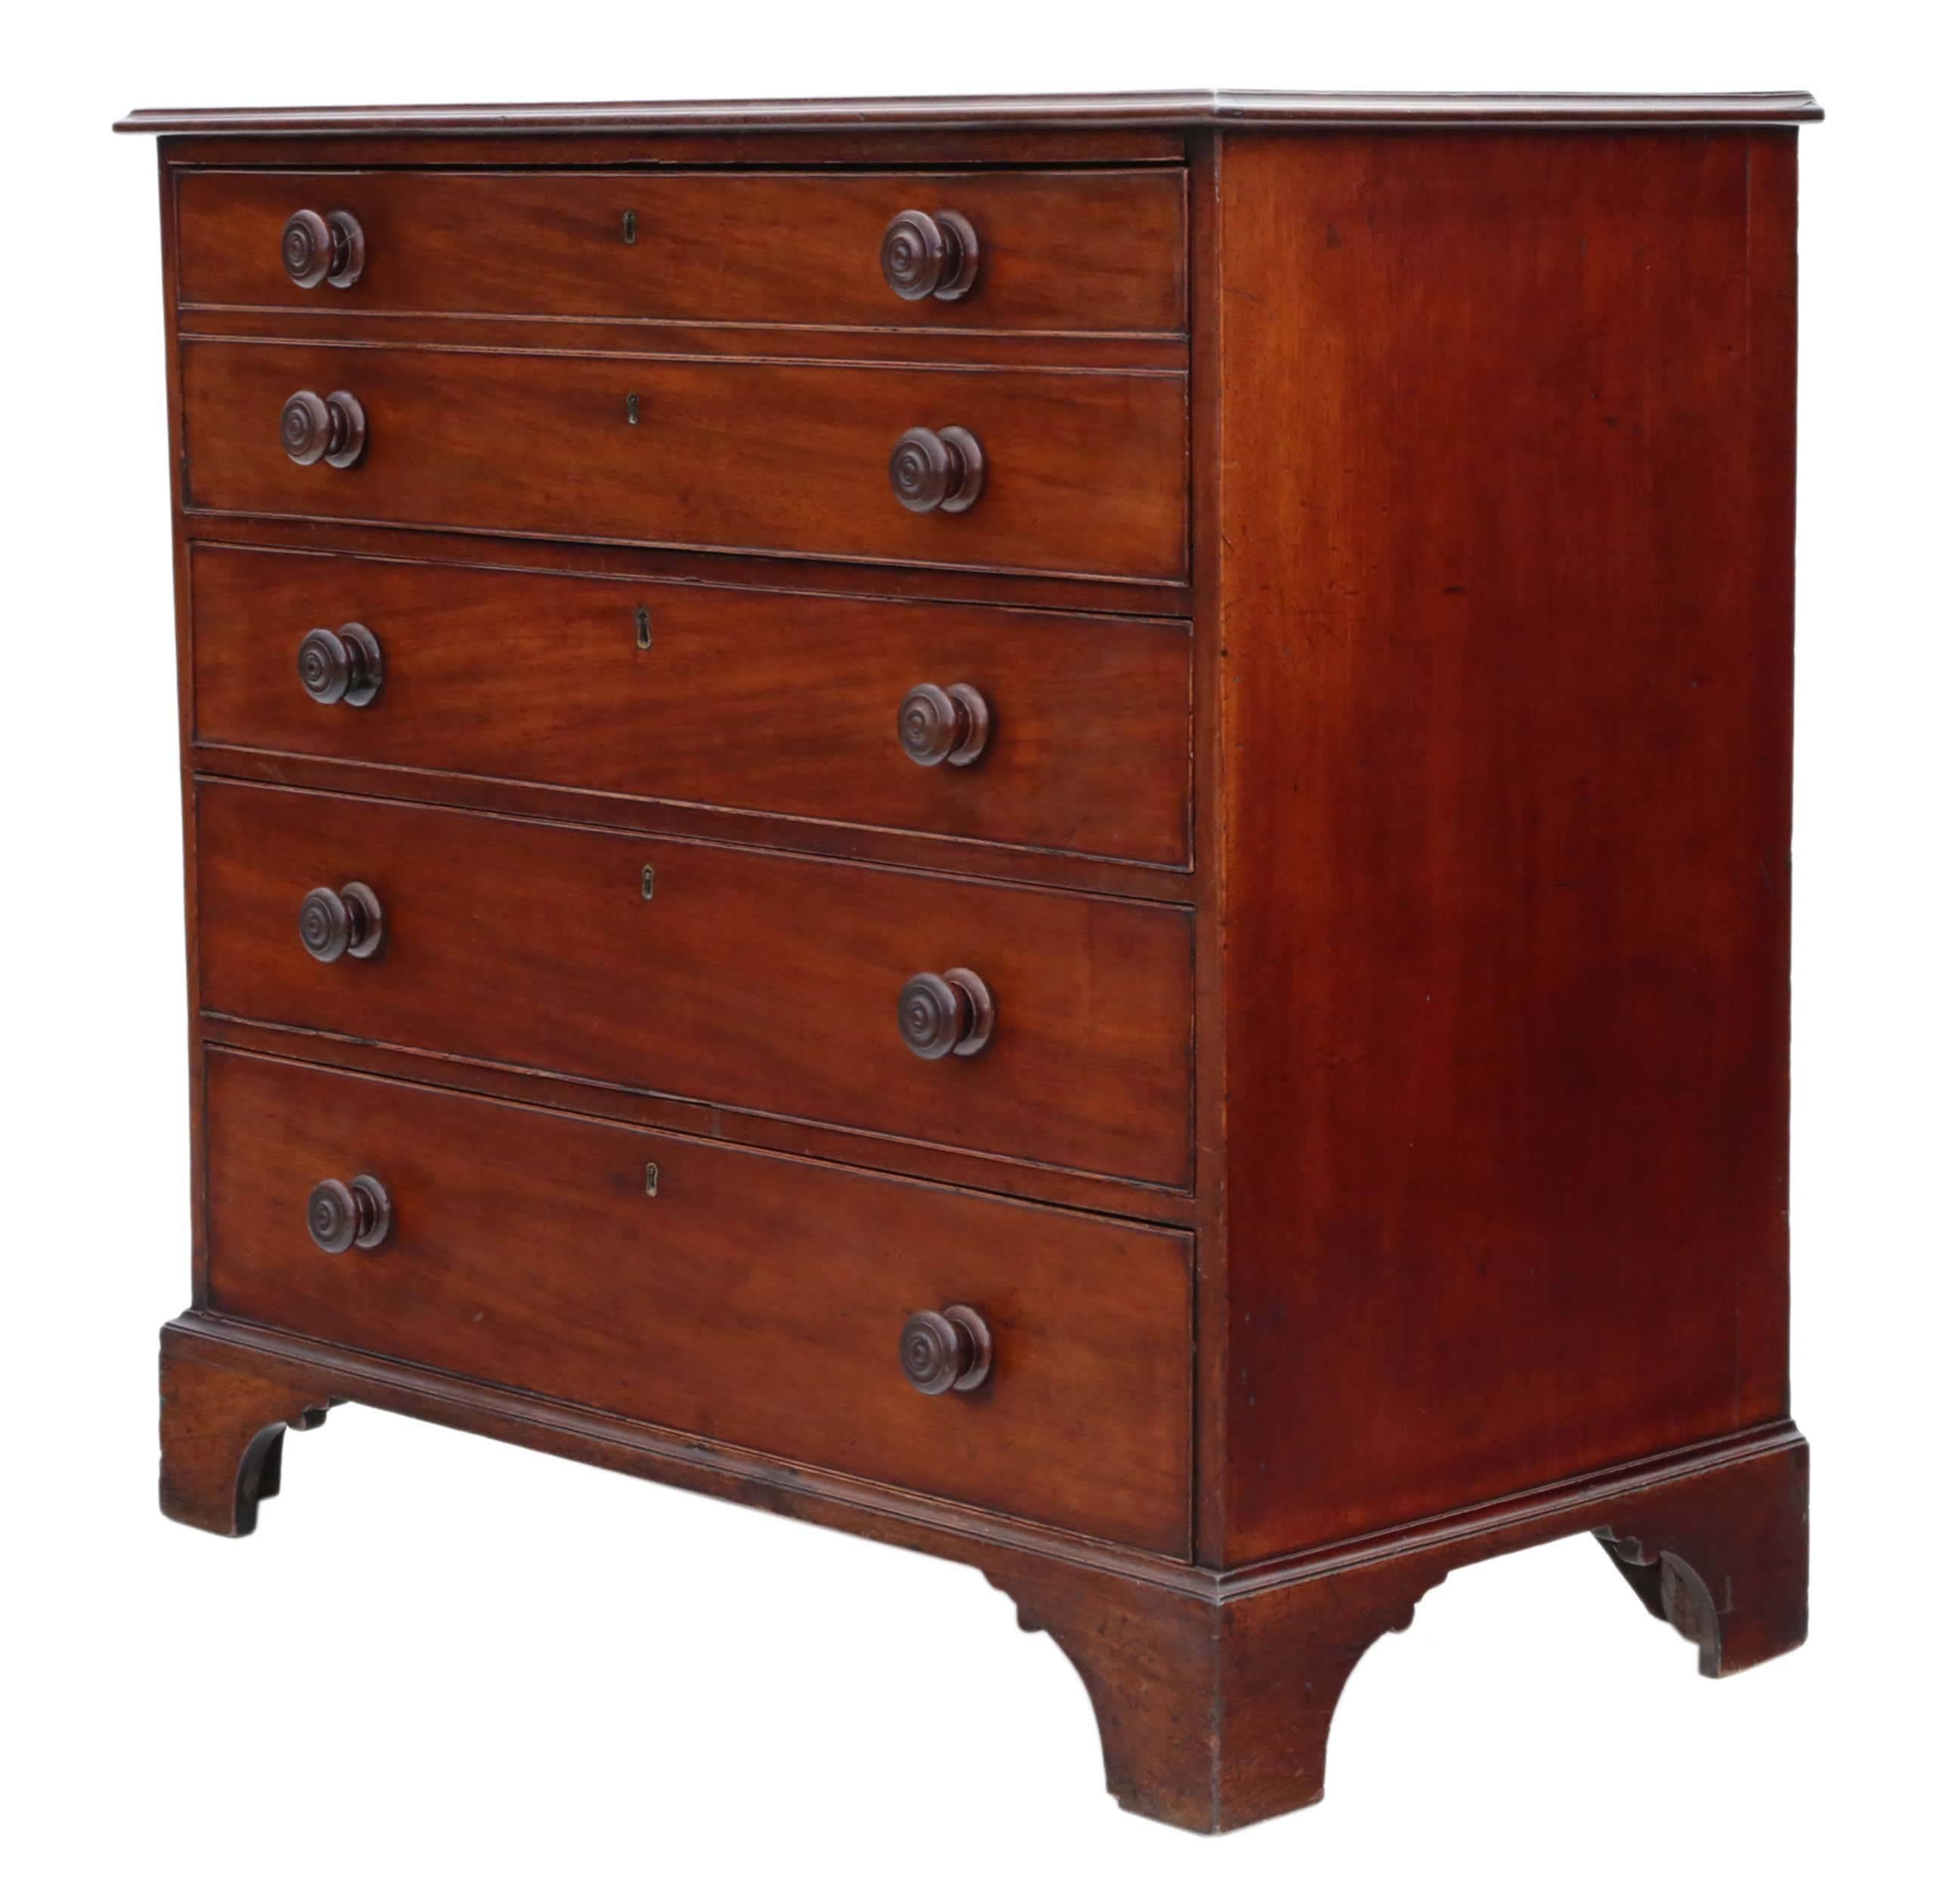 Antique Georgian Mahogany Secretaire Desk Writing Table Chest of Drawers For Sale 1